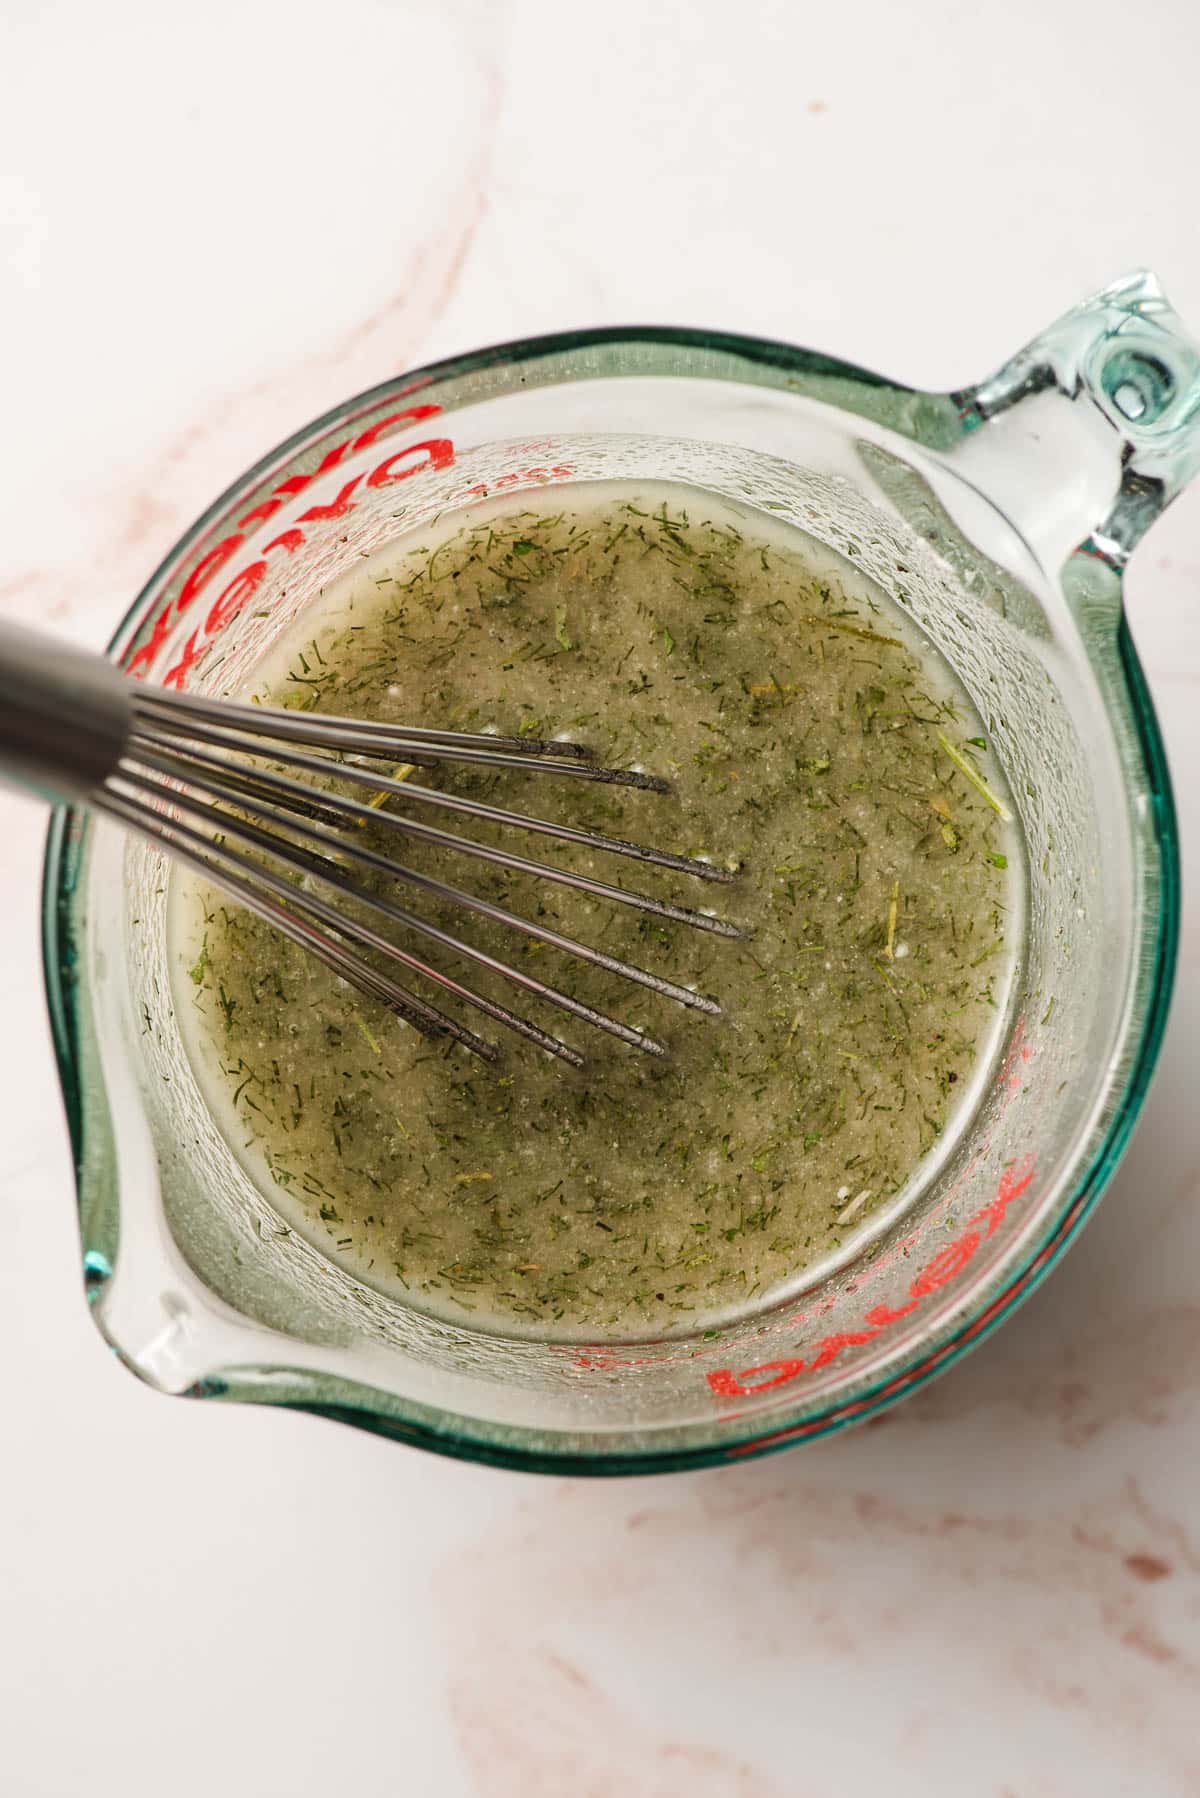 A ranch seasoning and oil mixture being whisked together in a glass measuring cup.